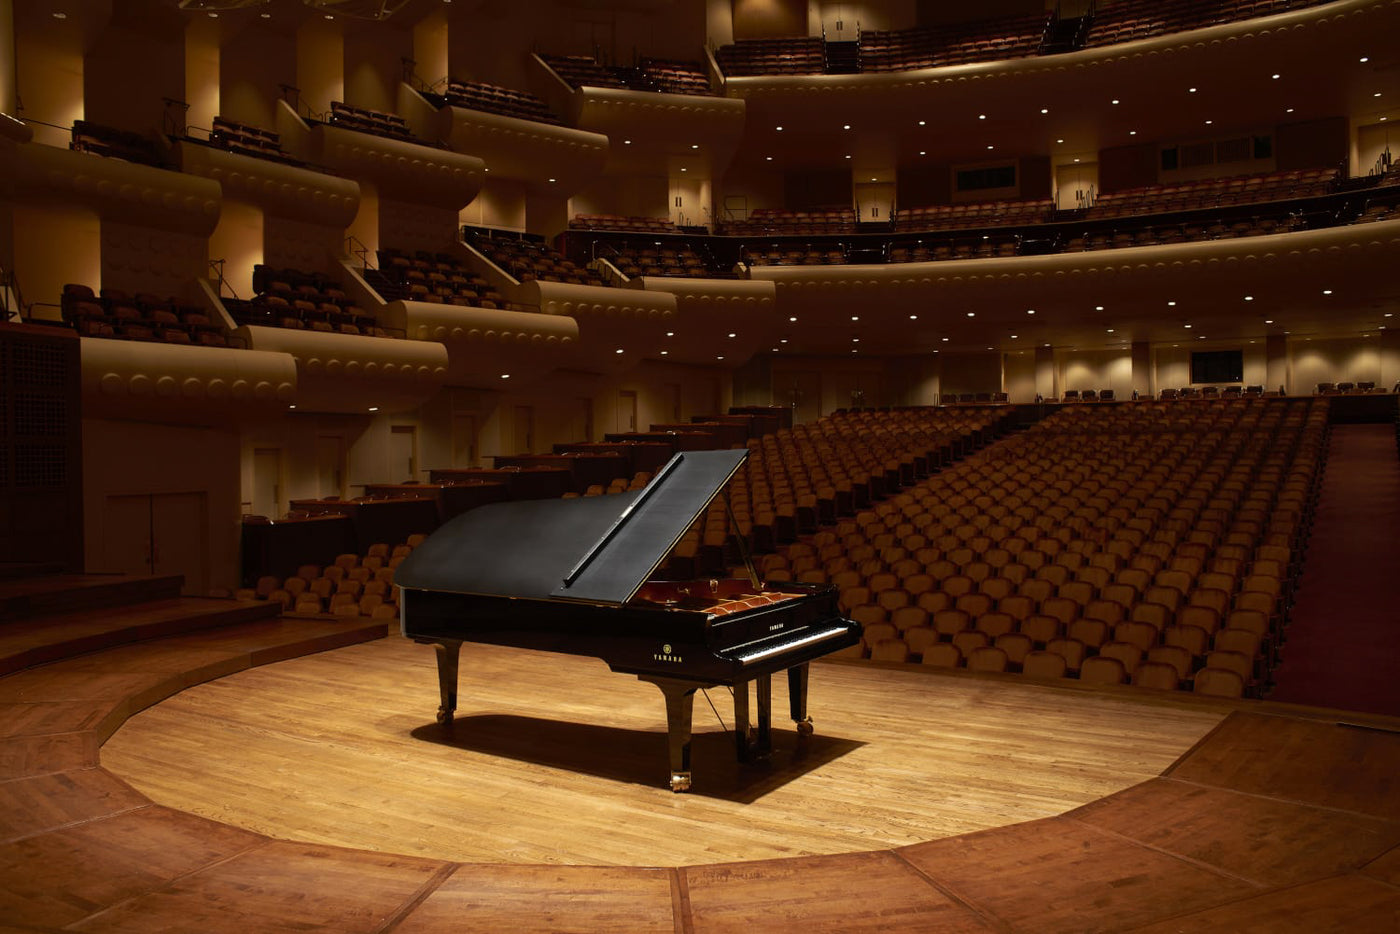 Grand piano centered on the stage of an elegant concert hall, anticipating a performance, with empty seats gently lit, highlighting the potential for a musical event.